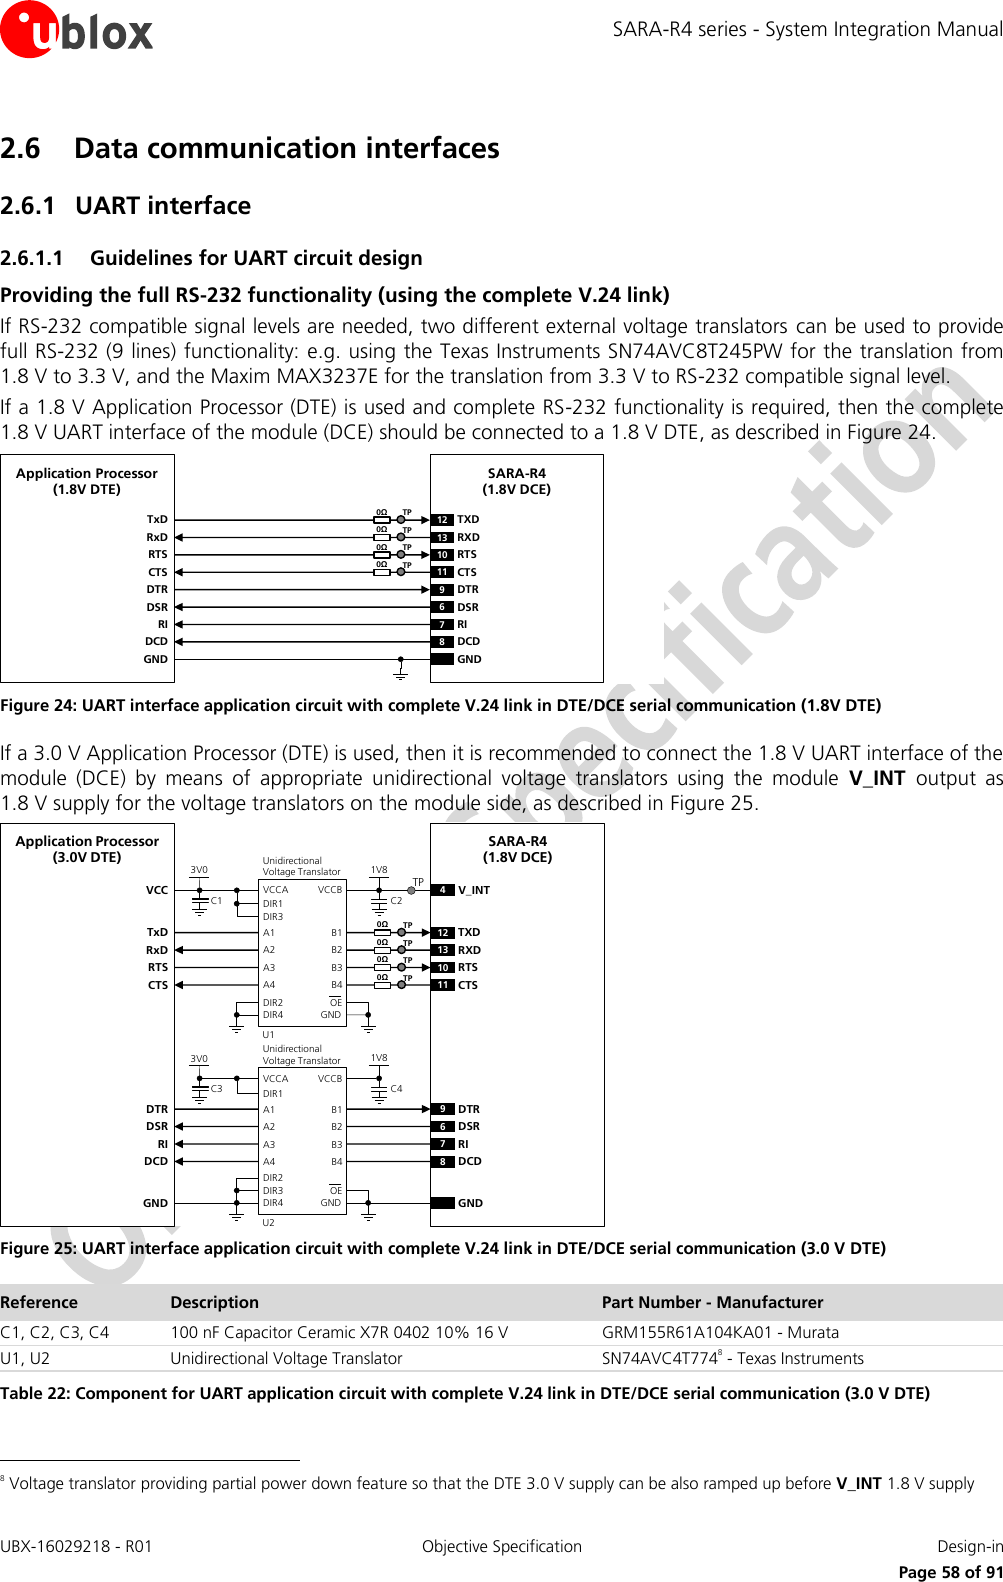 SARA-R4 series - System Integration Manual UBX-16029218 - R01  Objective Specification  Design-in     Page 58 of 91 2.6 Data communication interfaces 2.6.1 UART interface 2.6.1.1 Guidelines for UART circuit design Providing the full RS-232 functionality (using the complete V.24 link) If RS-232 compatible signal levels are needed, two different external voltage translators  can be used to provide full RS-232 (9 lines) functionality: e.g. using the Texas Instruments SN74AVC8T245PW for the translation from 1.8 V to 3.3 V, and the Maxim MAX3237E for the translation from 3.3 V to RS-232 compatible signal level. If a 1.8 V Application Processor (DTE) is used and complete RS-232 functionality is required, then the complete 1.8 V UART interface of the module (DCE) should be connected to a 1.8 V DTE, as described in Figure 24. TxDApplication Processor(1.8V DTE)RxDRTSCTSDTRDSRRIDCDGNDSARA-R4(1.8V DCE)12 TXD9DTR13 RXD10 RTS11 CTS6DSR7RI8DCDGND0ΩTP0ΩTP0ΩTP0ΩTP  Figure 24: UART interface application circuit with complete V.24 link in DTE/DCE serial communication (1.8V DTE) If a 3.0 V Application Processor (DTE) is used, then it is recommended to connect the 1.8 V UART interface of the module  (DCE)  by  means  of  appropriate  unidirectional  voltage  translators  using  the  module  V_INT  output  as 1.8 V supply for the voltage translators on the module side, as described in Figure 25. 4V_INTTxDApplication Processor(3.0V DTE)RxDRTSCTSDTRDSRRIDCDGNDSARA-R4(1.8V DCE)12 TXD9DTR13 RXD10 RTS11 CTS6DSR7RI8DCDGND1V8B1 A1GNDU1B3A3VCCBVCCAUnidirectionalVoltage TranslatorC1 C23V0DIR3DIR2 OEDIR1VCCB2 A2B4A4DIR41V8B1 A1GNDU2B3A3VCCBVCCAUnidirectionalVoltage TranslatorC3 C43V0DIR1DIR3 OEB2 A2B4A4DIR4DIR2TP0ΩTP0ΩTP0ΩTP0ΩTP Figure 25: UART interface application circuit with complete V.24 link in DTE/DCE serial communication (3.0 V DTE) Reference Description Part Number - Manufacturer C1, C2, C3, C4 100 nF Capacitor Ceramic X7R 0402 10% 16 V GRM155R61A104KA01 - Murata U1, U2 Unidirectional Voltage Translator SN74AVC4T7748 - Texas Instruments Table 22: Component for UART application circuit with complete V.24 link in DTE/DCE serial communication (3.0 V DTE)                                                        8 Voltage translator providing partial power down feature so that the DTE 3.0 V supply can be also ramped up before V_INT 1.8 V supply 